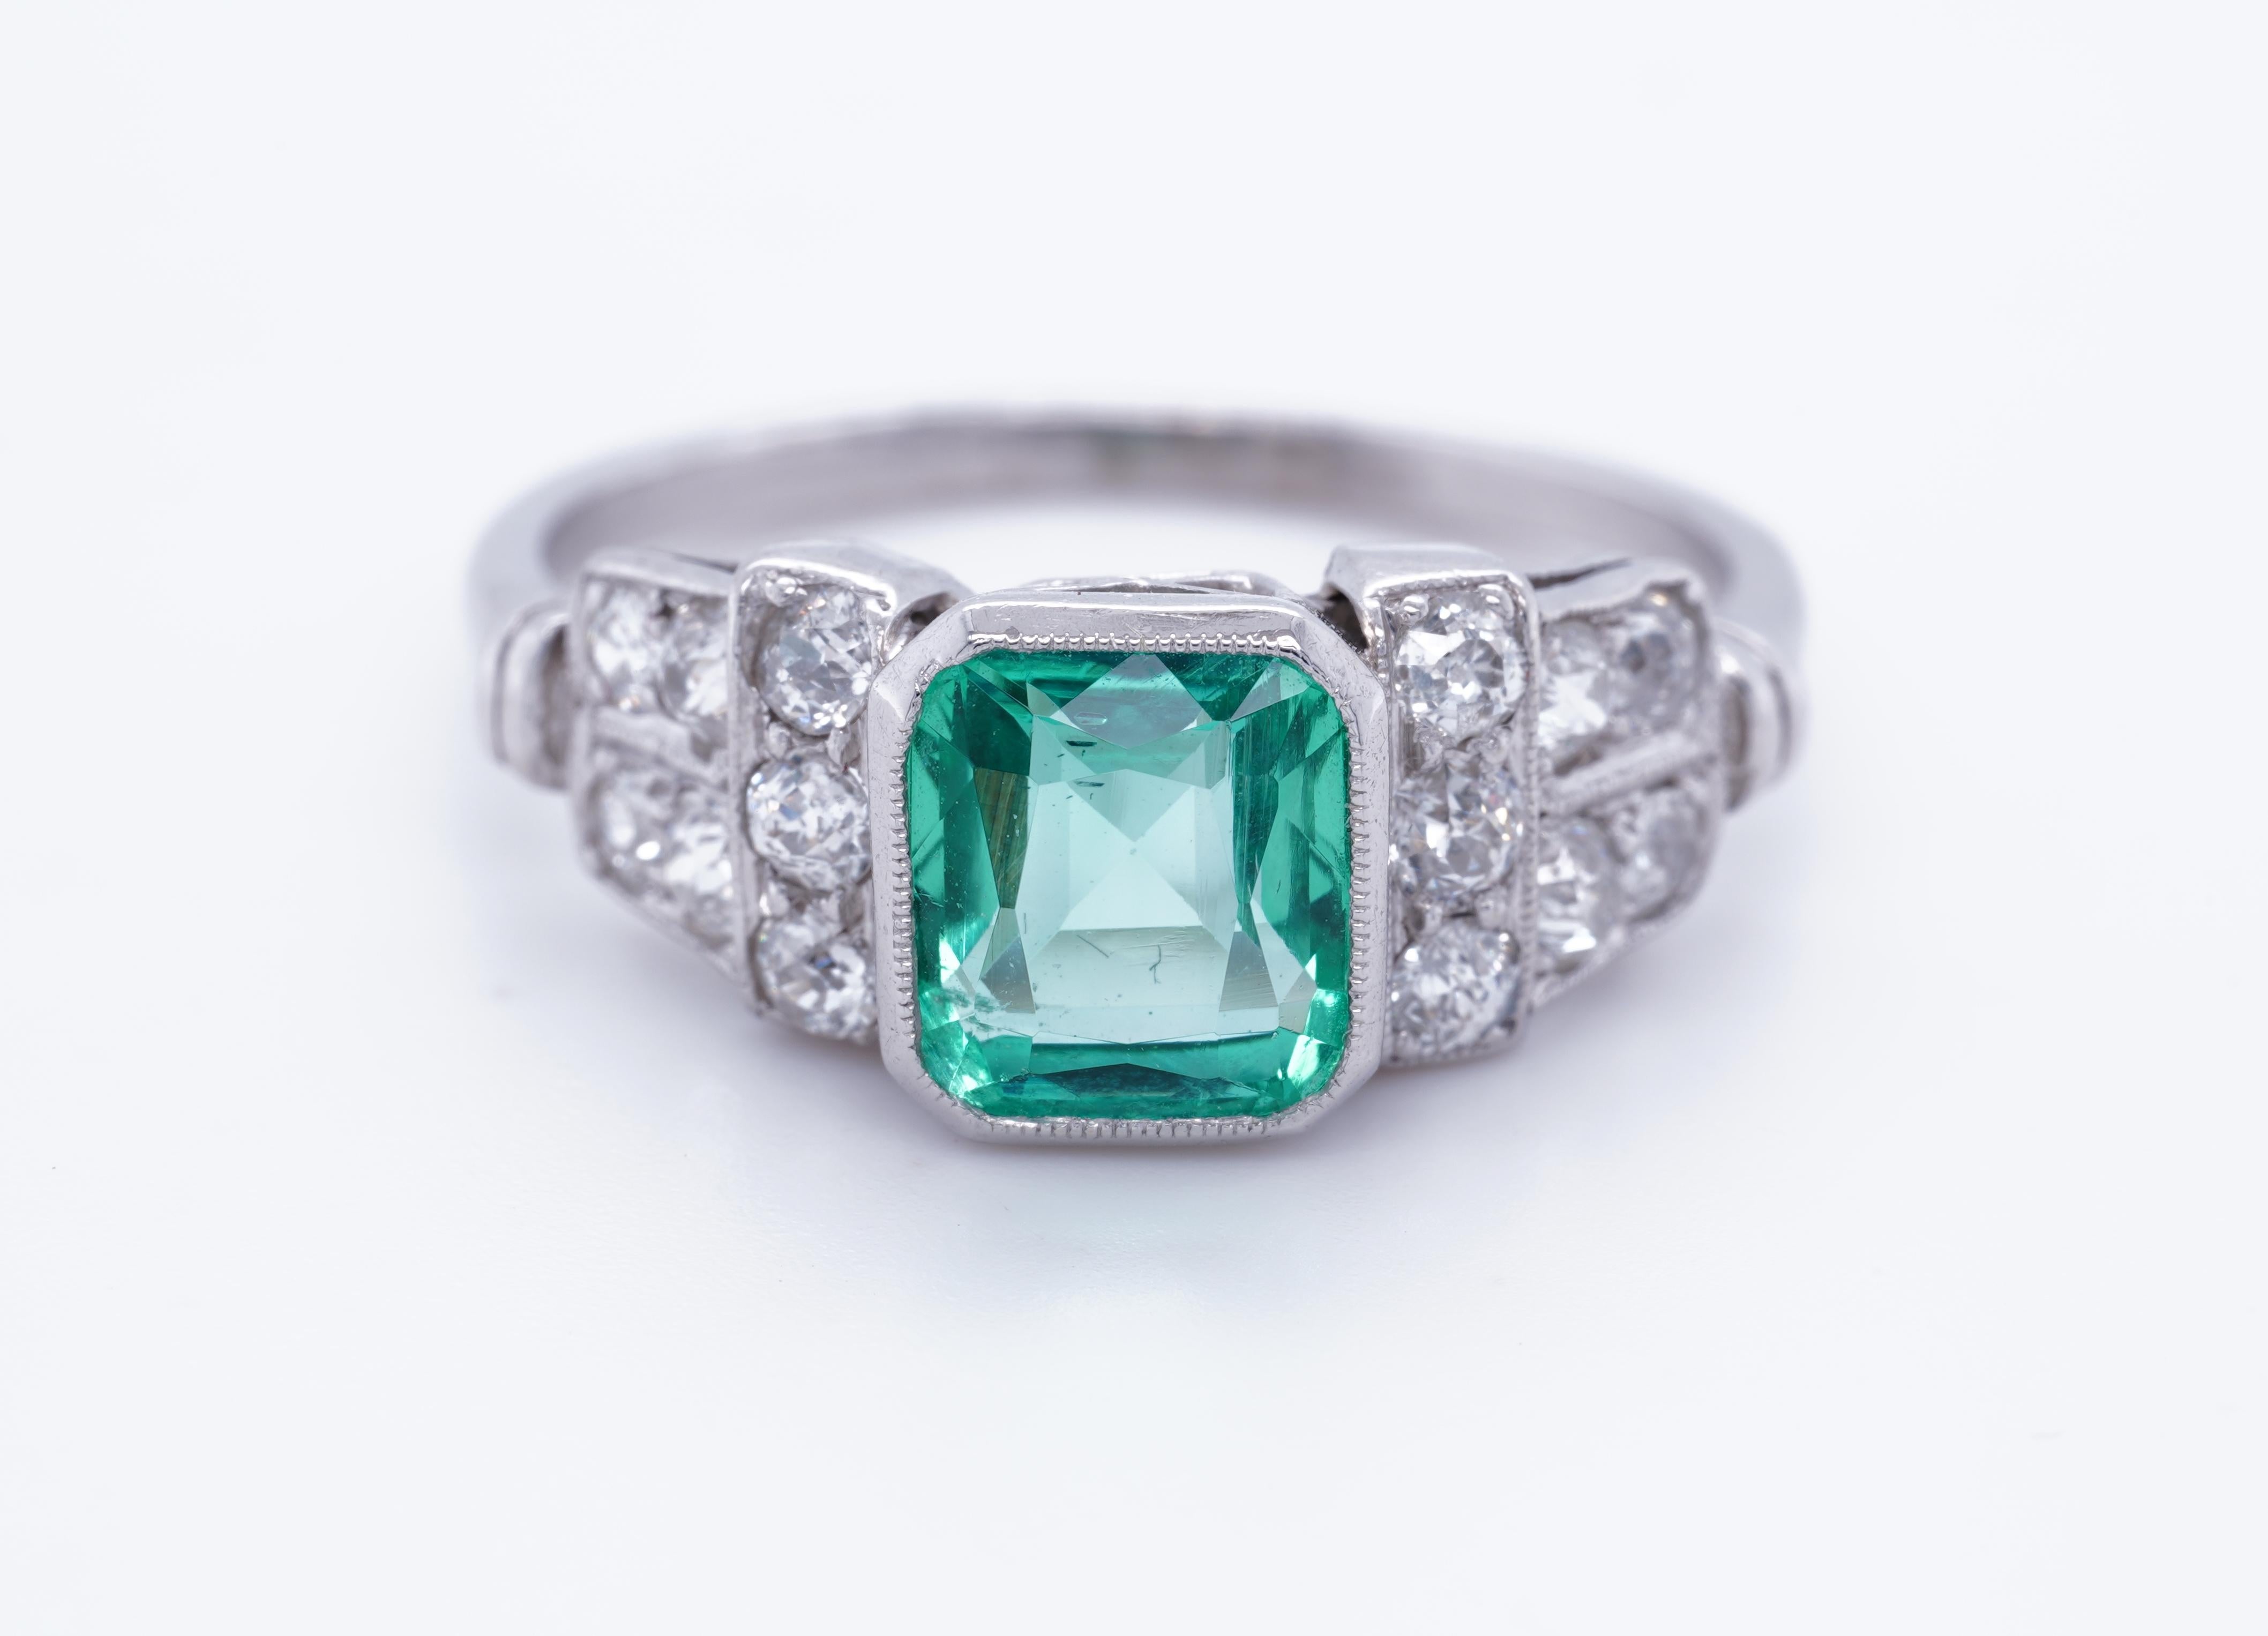 GIA Certified Natural Green Columbian Emerald Cushion & Diamond Platinum Ring Mint 1930s
Original Vintage, 1930's never been worn.

GIA Certified, GIA REPORT 5222492379, Natural Green Columbian Emerald.  Emerald is Cushion Cut, diamonds are